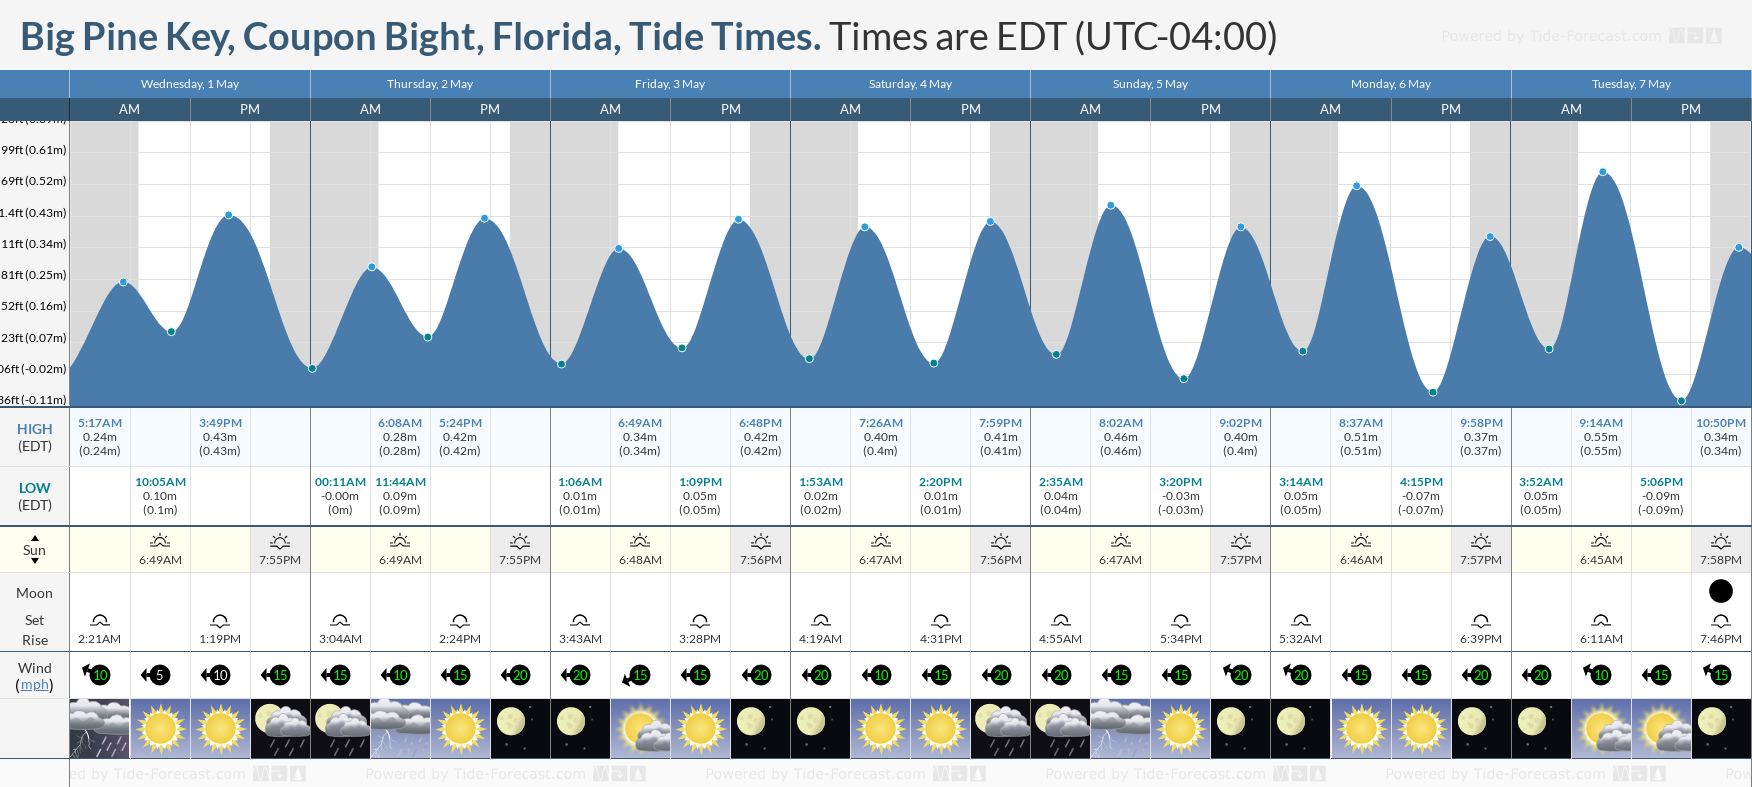 Big Pine Key, Coupon Bight, Florida Tide Chart including high and low tide tide times for the next 7 days